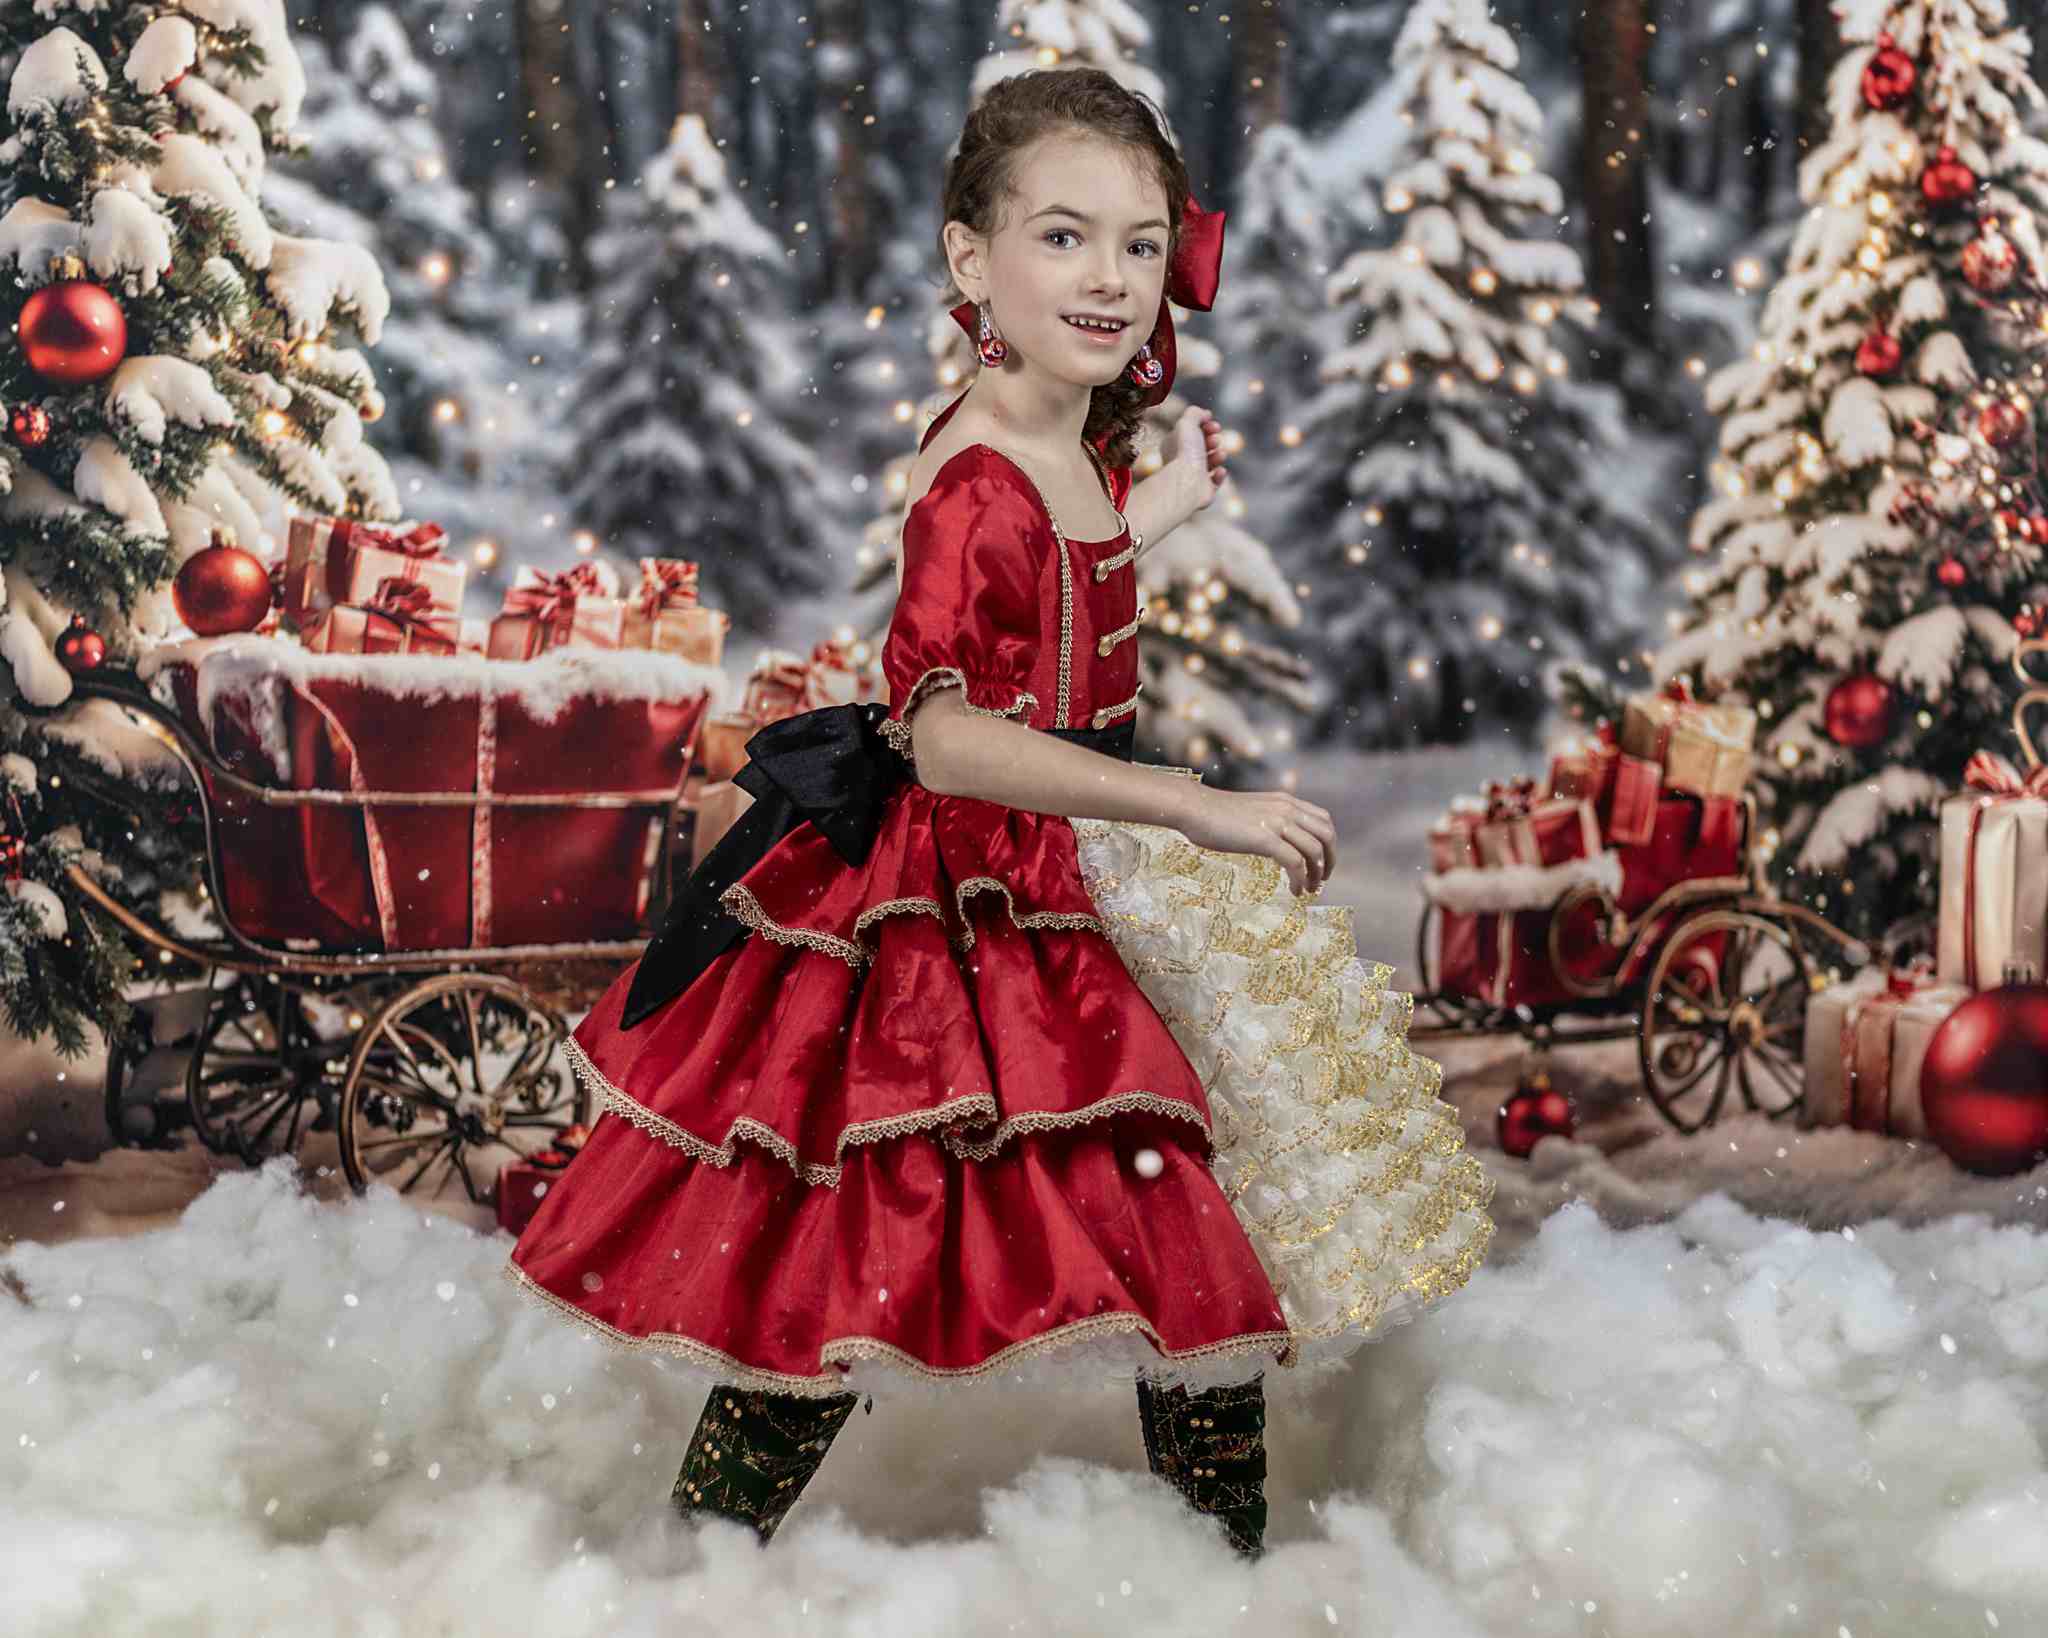 Kate Christmas Tree Outdoor Snowy Gift Backdrop for Photography